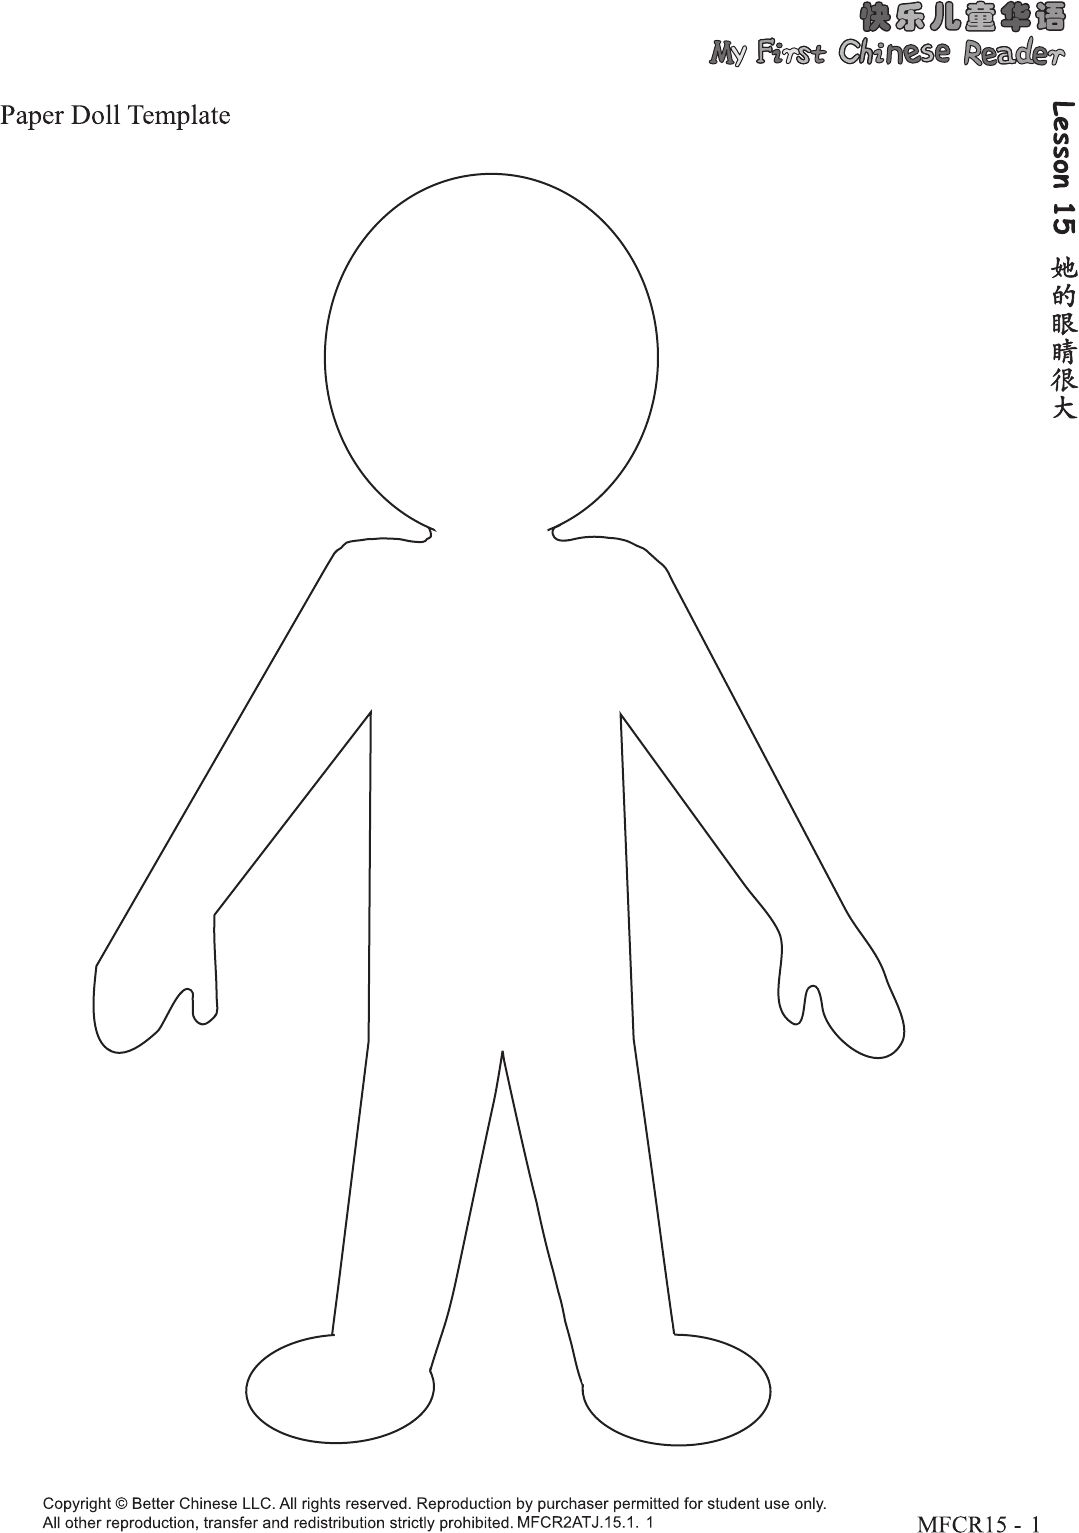 Free Paper Doll Template PDF 575KB 1 Page s 